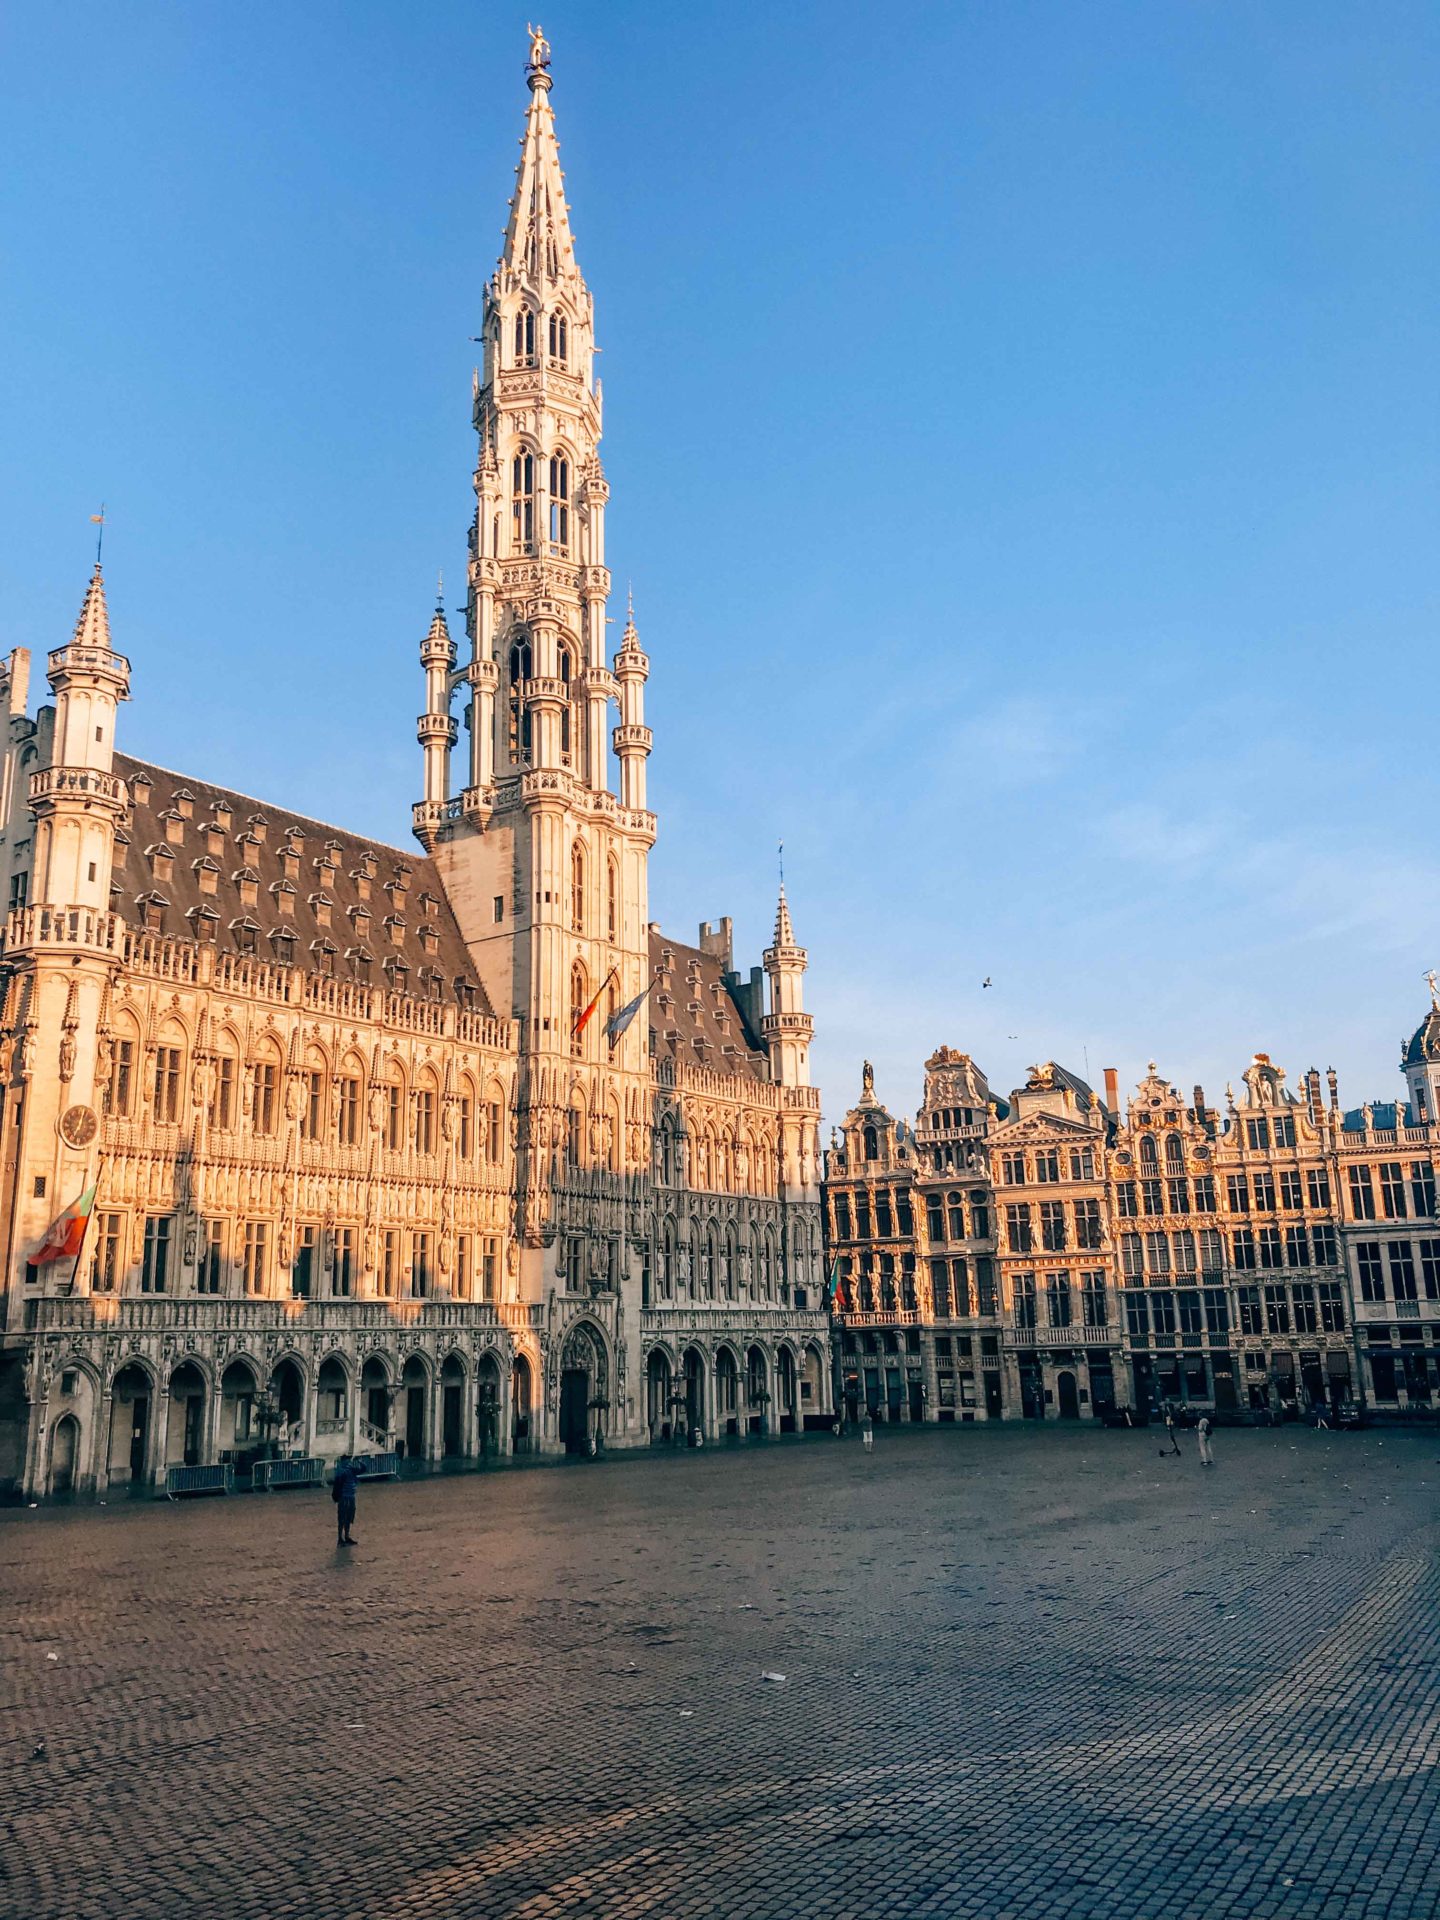 Sunrise on the Grand Place of Brussels